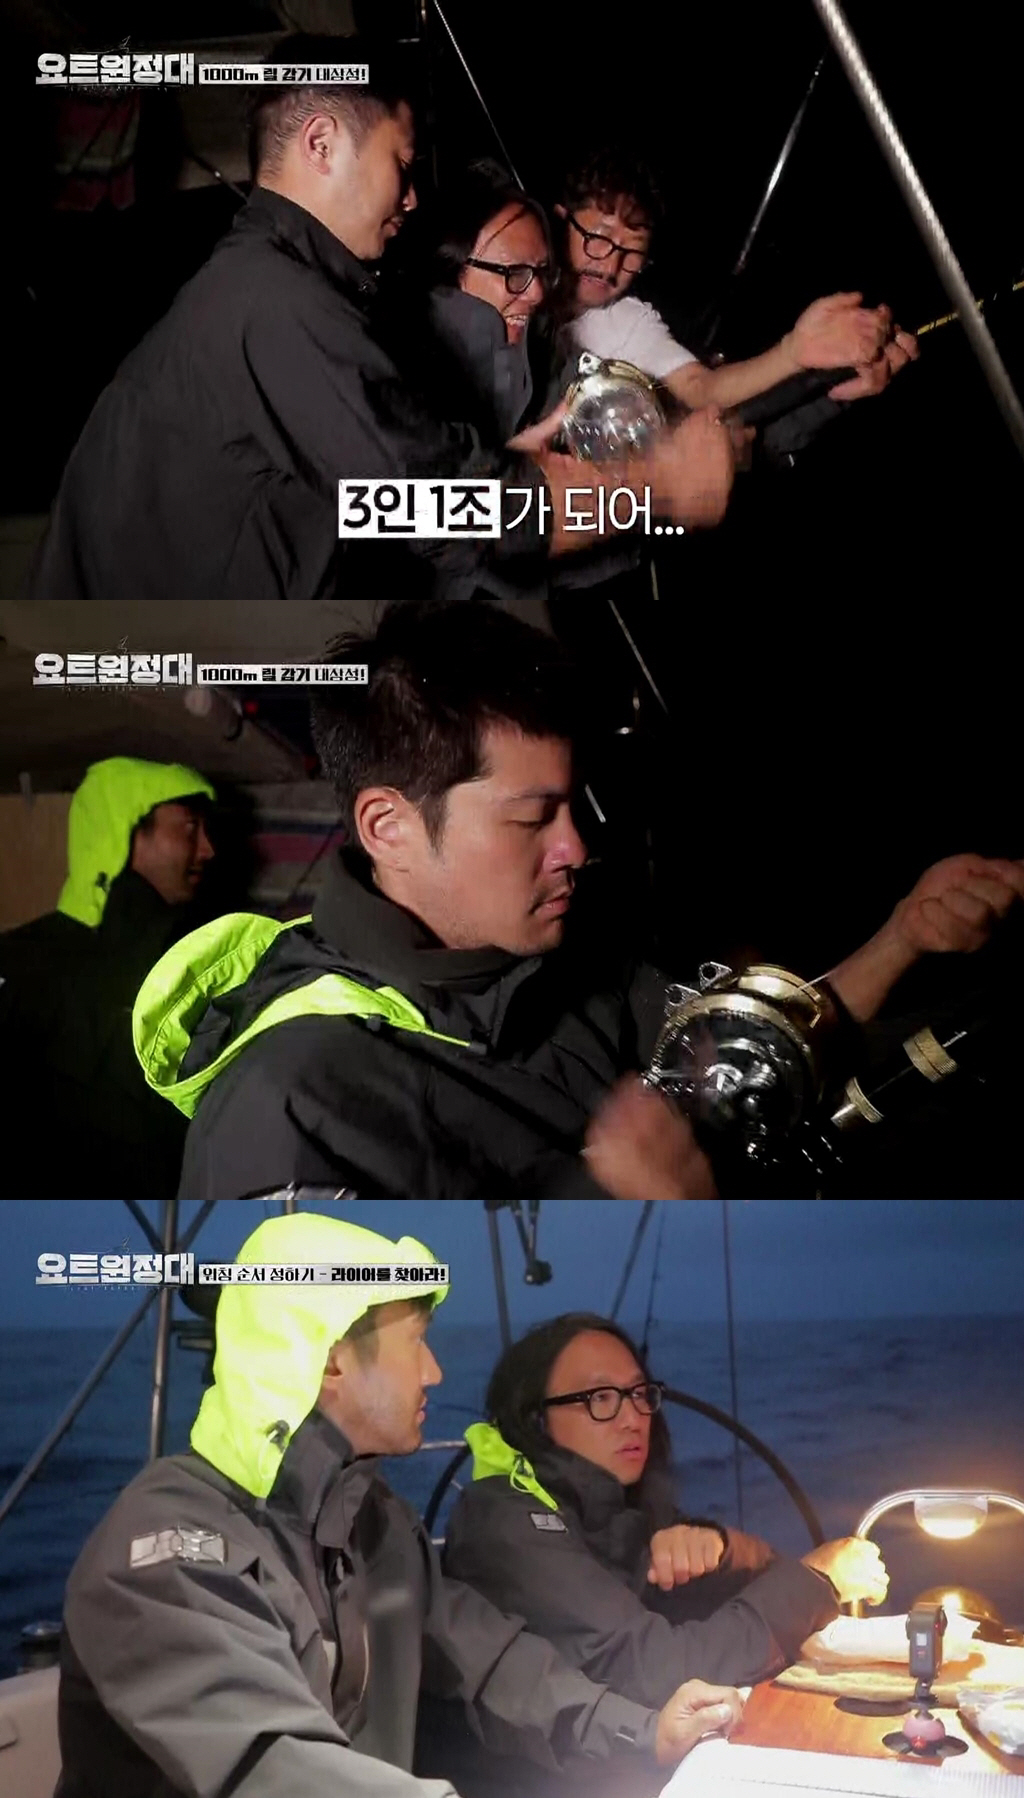 What is the story of the yacht expedition suddenly working on the group of moon nights?MBC Everlon yacht Expedition, which is broadcasted on September 28, depicts Jin Goo - Choi Siwon - Jang Ha - Song Ho Jun, who departs vigorously for a new purpose after deciding unexpected return.The members who have found peace again after the storm will find the pleasure of their own yacht.On this day, the yacht expedition members say that they have a peaceful day for a long time, drinking warm coffee on a calm sea and chatting.But the pleasure is that, for a moment, there is an unexpected emergency, and the yacht is noisy at once, and Captain Kim Seung-jins fishing line has been released during the voyage.The length of the loose fishing line was 1,000 meters, and the crew fell into the mens boat.To help Captain Kim Seung-jin, the yacht Expedition crews started full-operation of the teamwork, one by one, and carried out a fishing line Flu long.However, the line was wrapped to allow the arms to fall, but the 1000m fishing line was not enough for Flu.So, the idea of ​​collaborating with a group of three people came out, and the Infinite Fishing Line Flu Hell was unfolded.The images of the members who were immersed in the fishing line Flu in the public photos make us guess the emergency that occurred at the moon night.What was the result of the teamwork full operation?MBC Everlon yacht Expedition is broadcast every Monday at 8:30 pm.